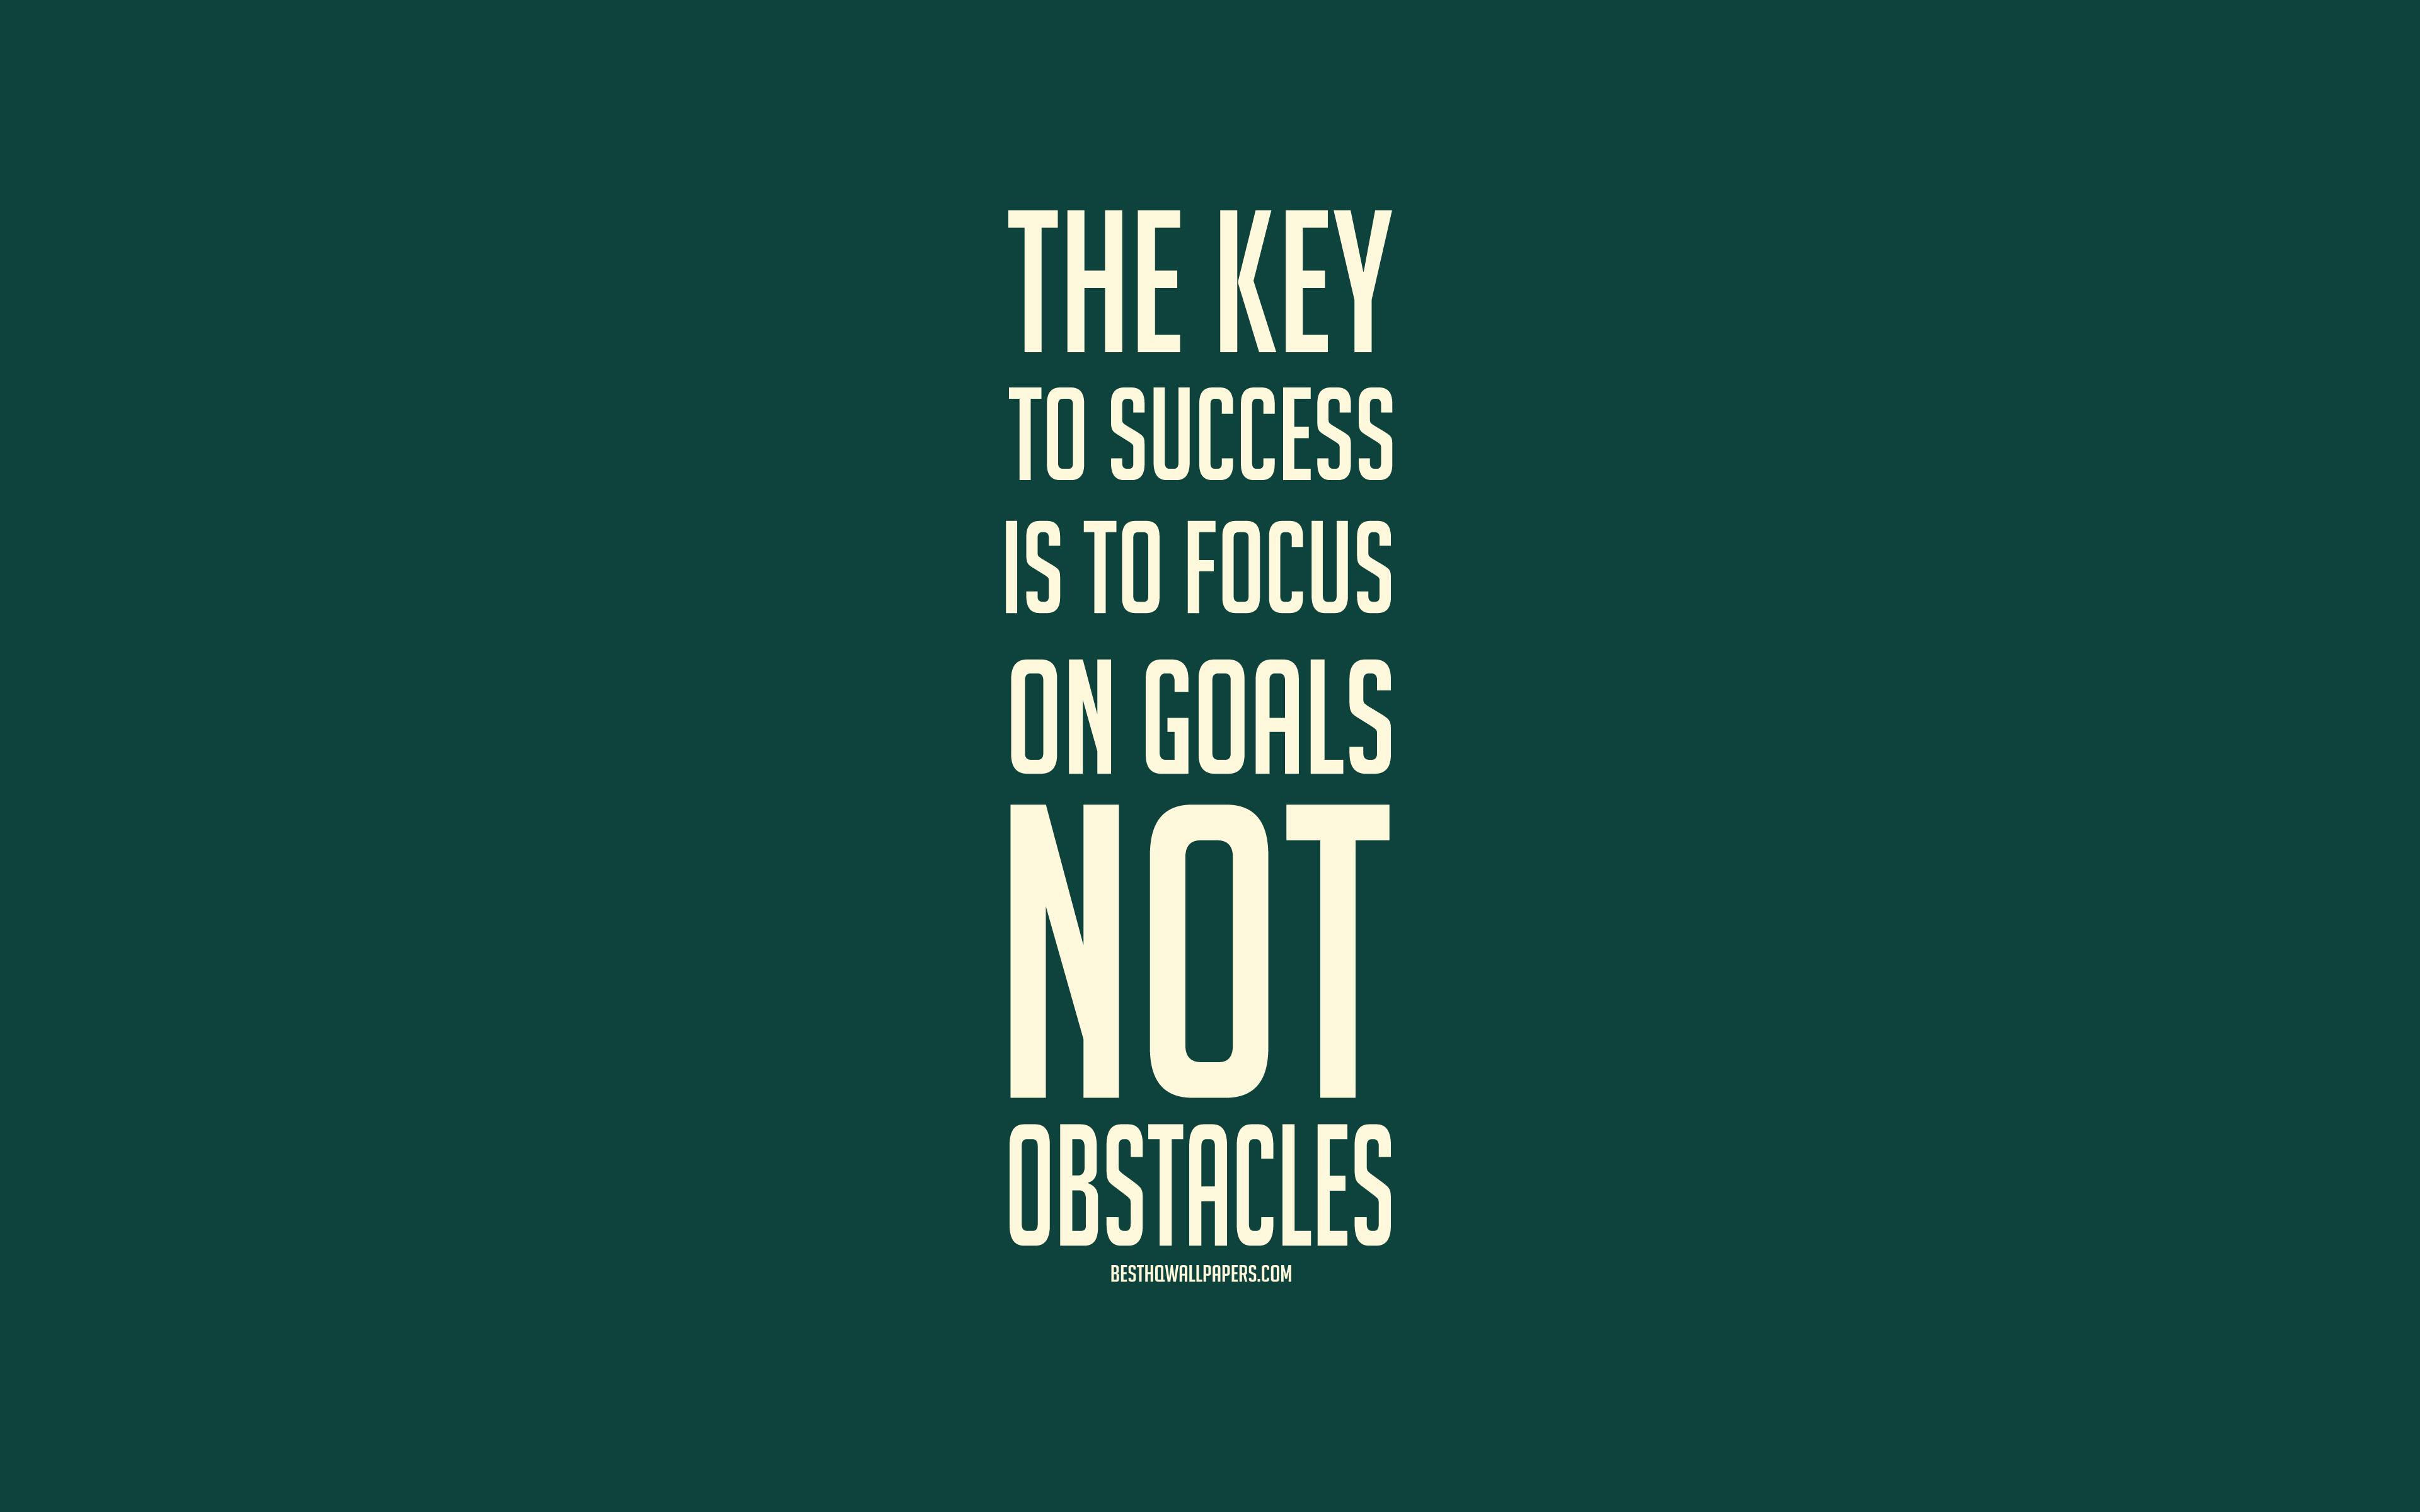 Download wallpaper The key to success is to focus on goals not